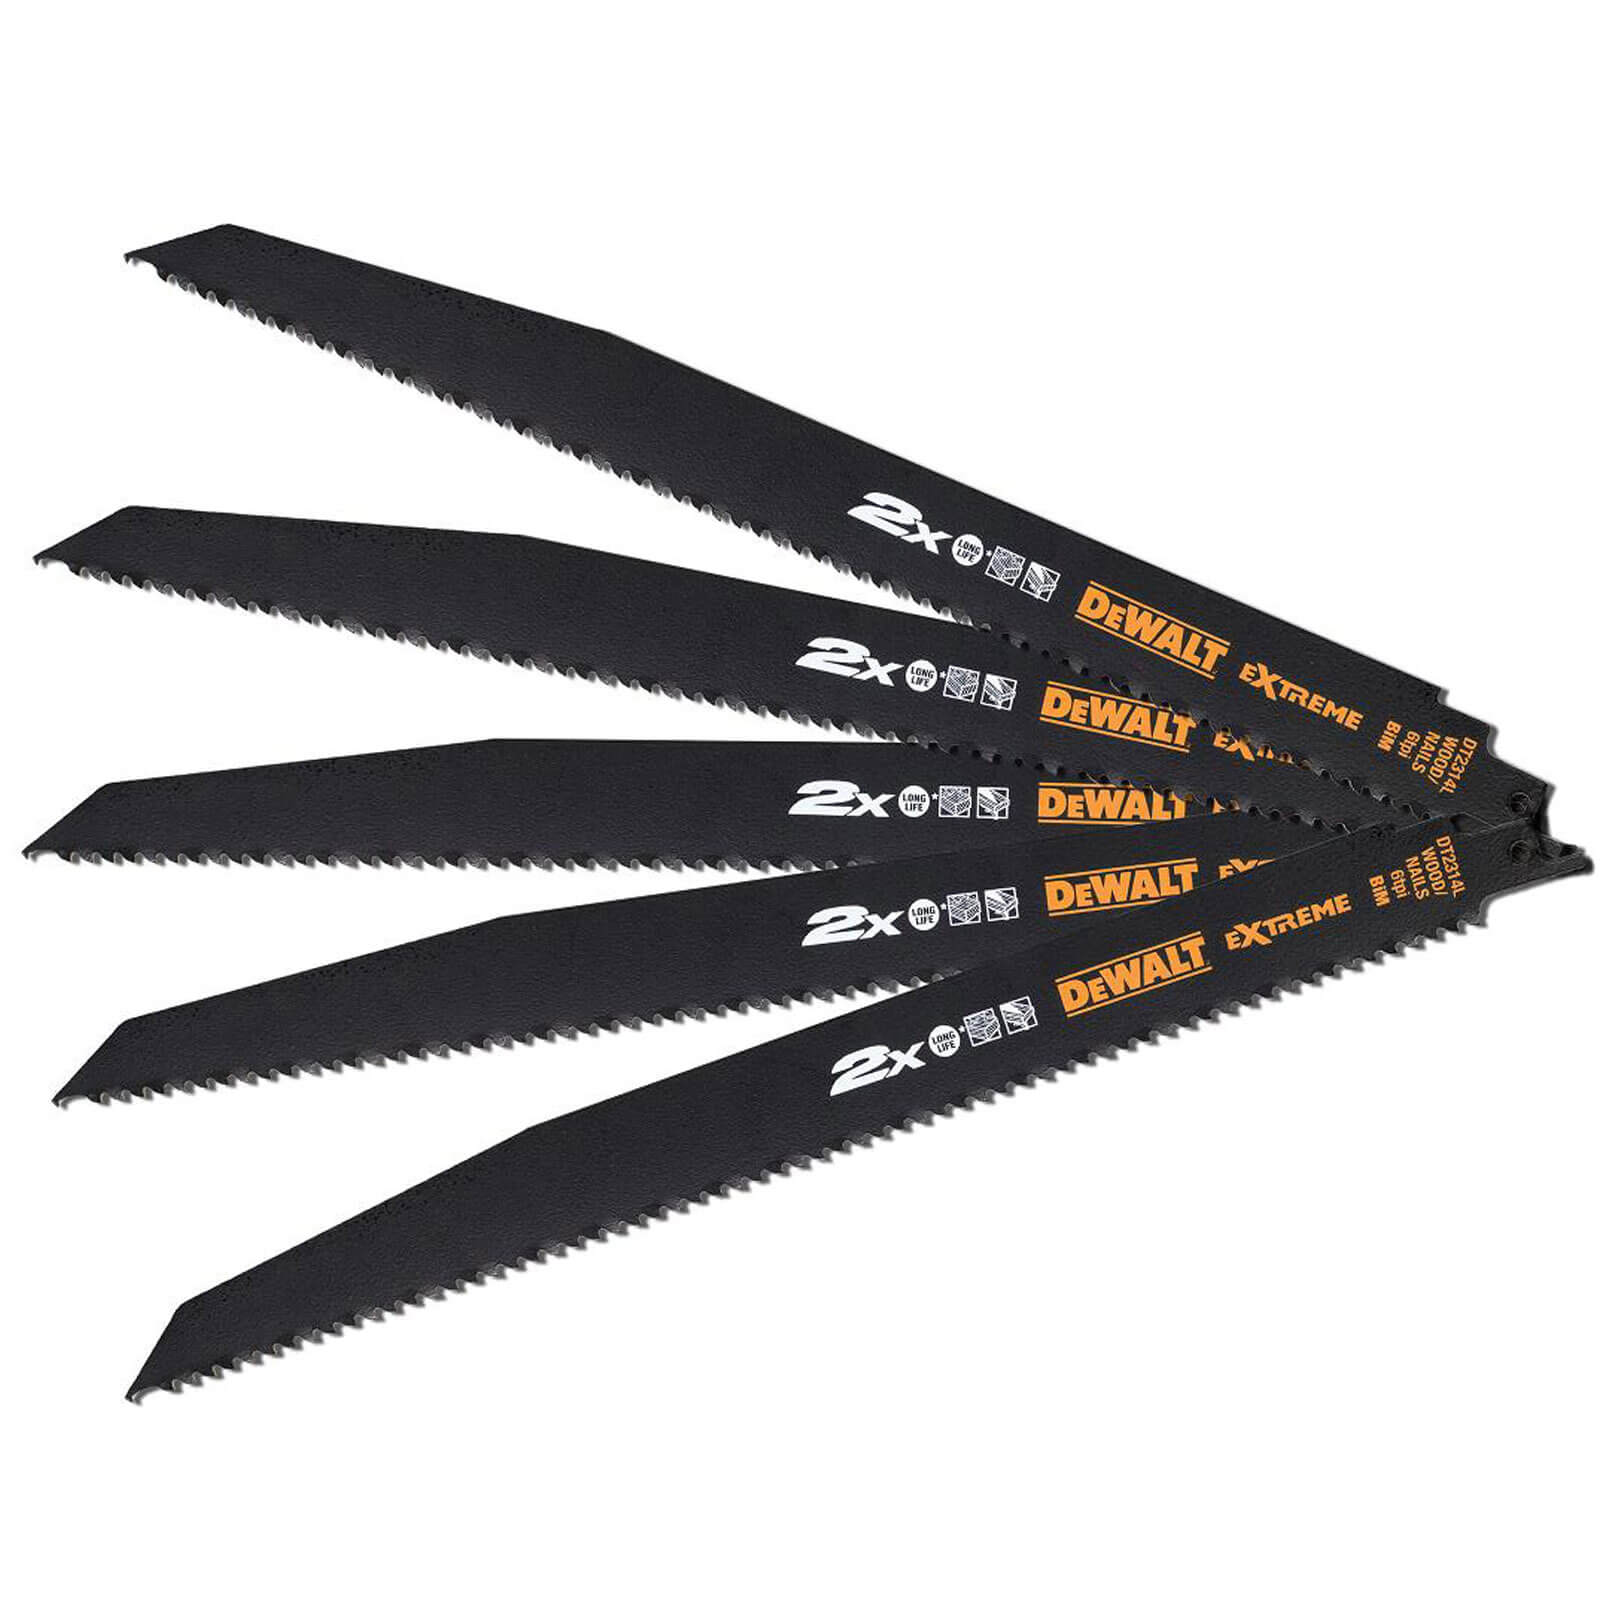 Photos - Power Tool Accessory DeWALT Extreme 2X Life Wood and Nails Reciprocating Sabre Saw Blades 305mm 